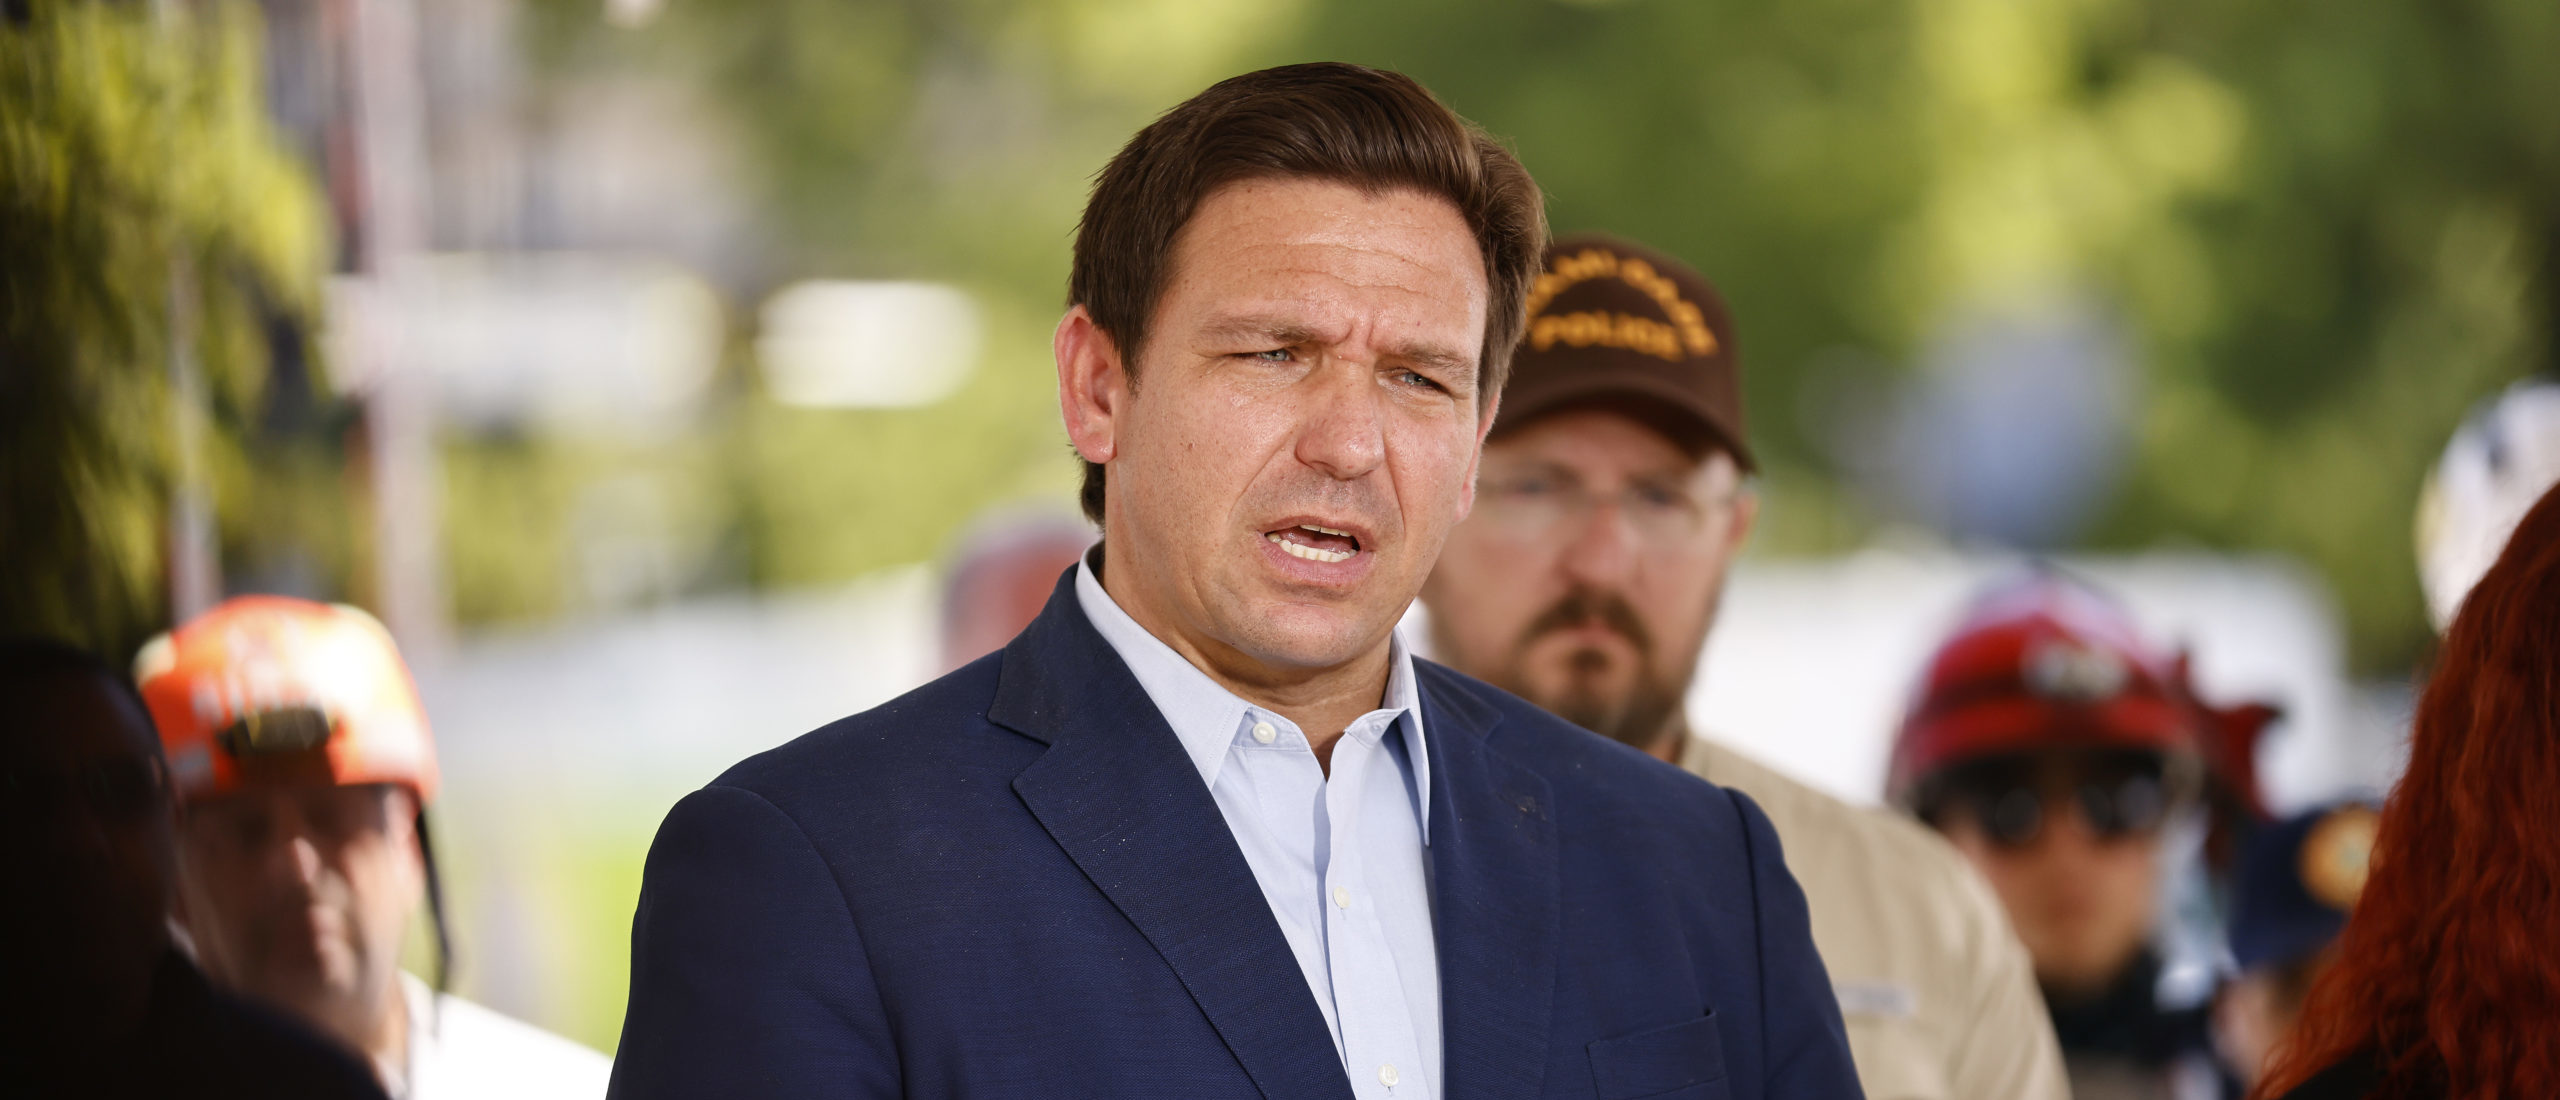 Florida Gov. Ron DeSantis speaks to the media about the 12-story Champlain Towers South condo building that partially collapsed on July 03, 2021 in Surfside, Florida. Over one hundred people are being reported as missing as the search-and-rescue effort continues. (Photo by Michael Reaves/Getty Images)